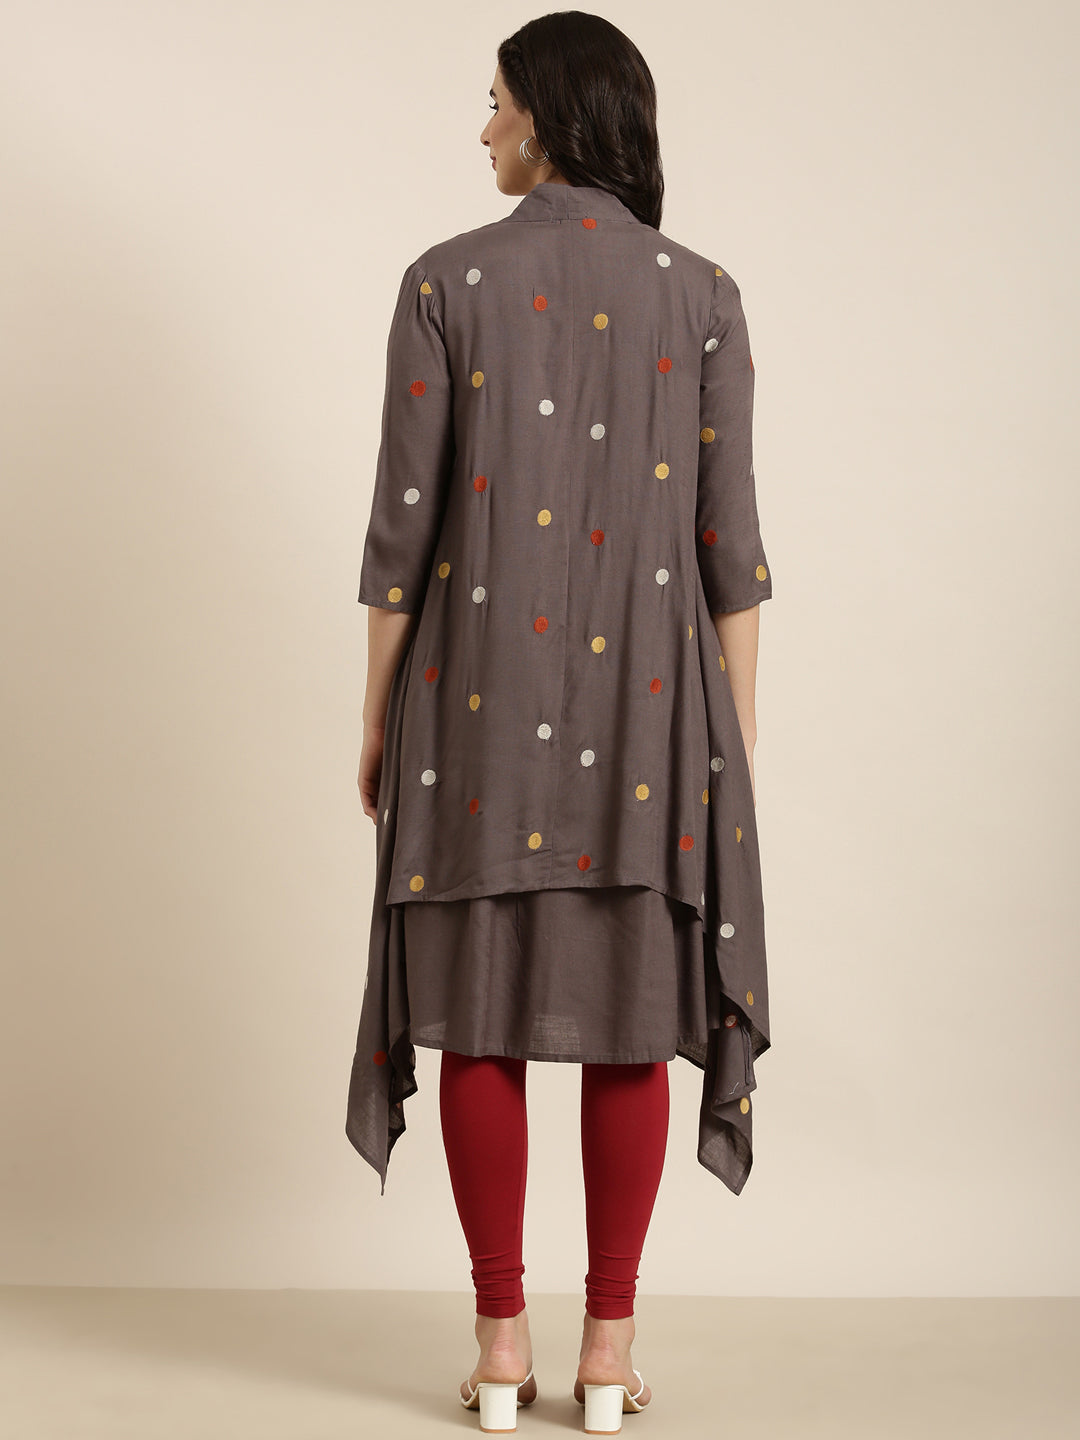 Women A-Line Grey Solid Kurta Comes With Overcoat